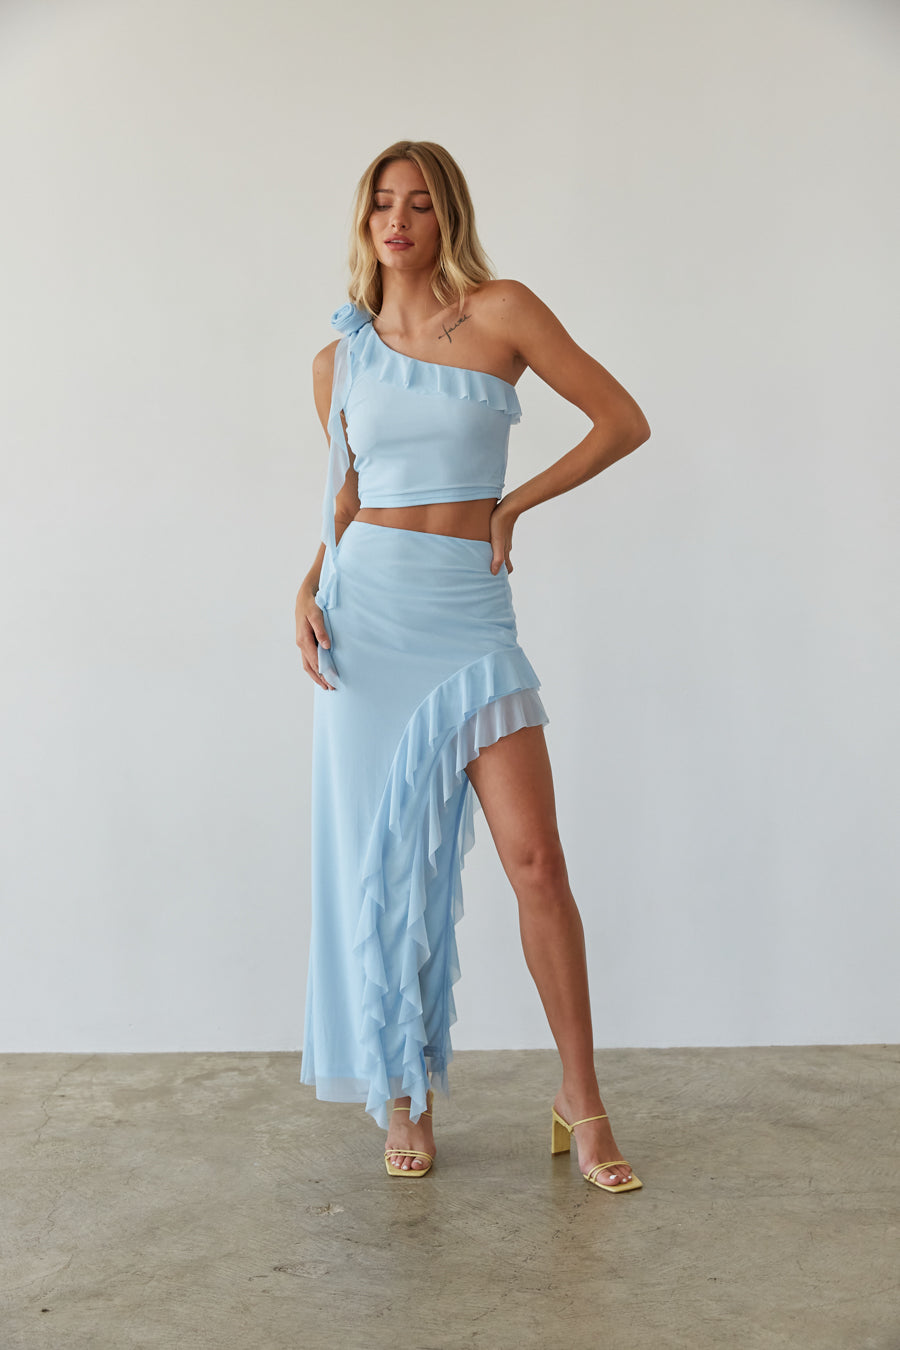 beachy waves outfit | beach wedding outfit 